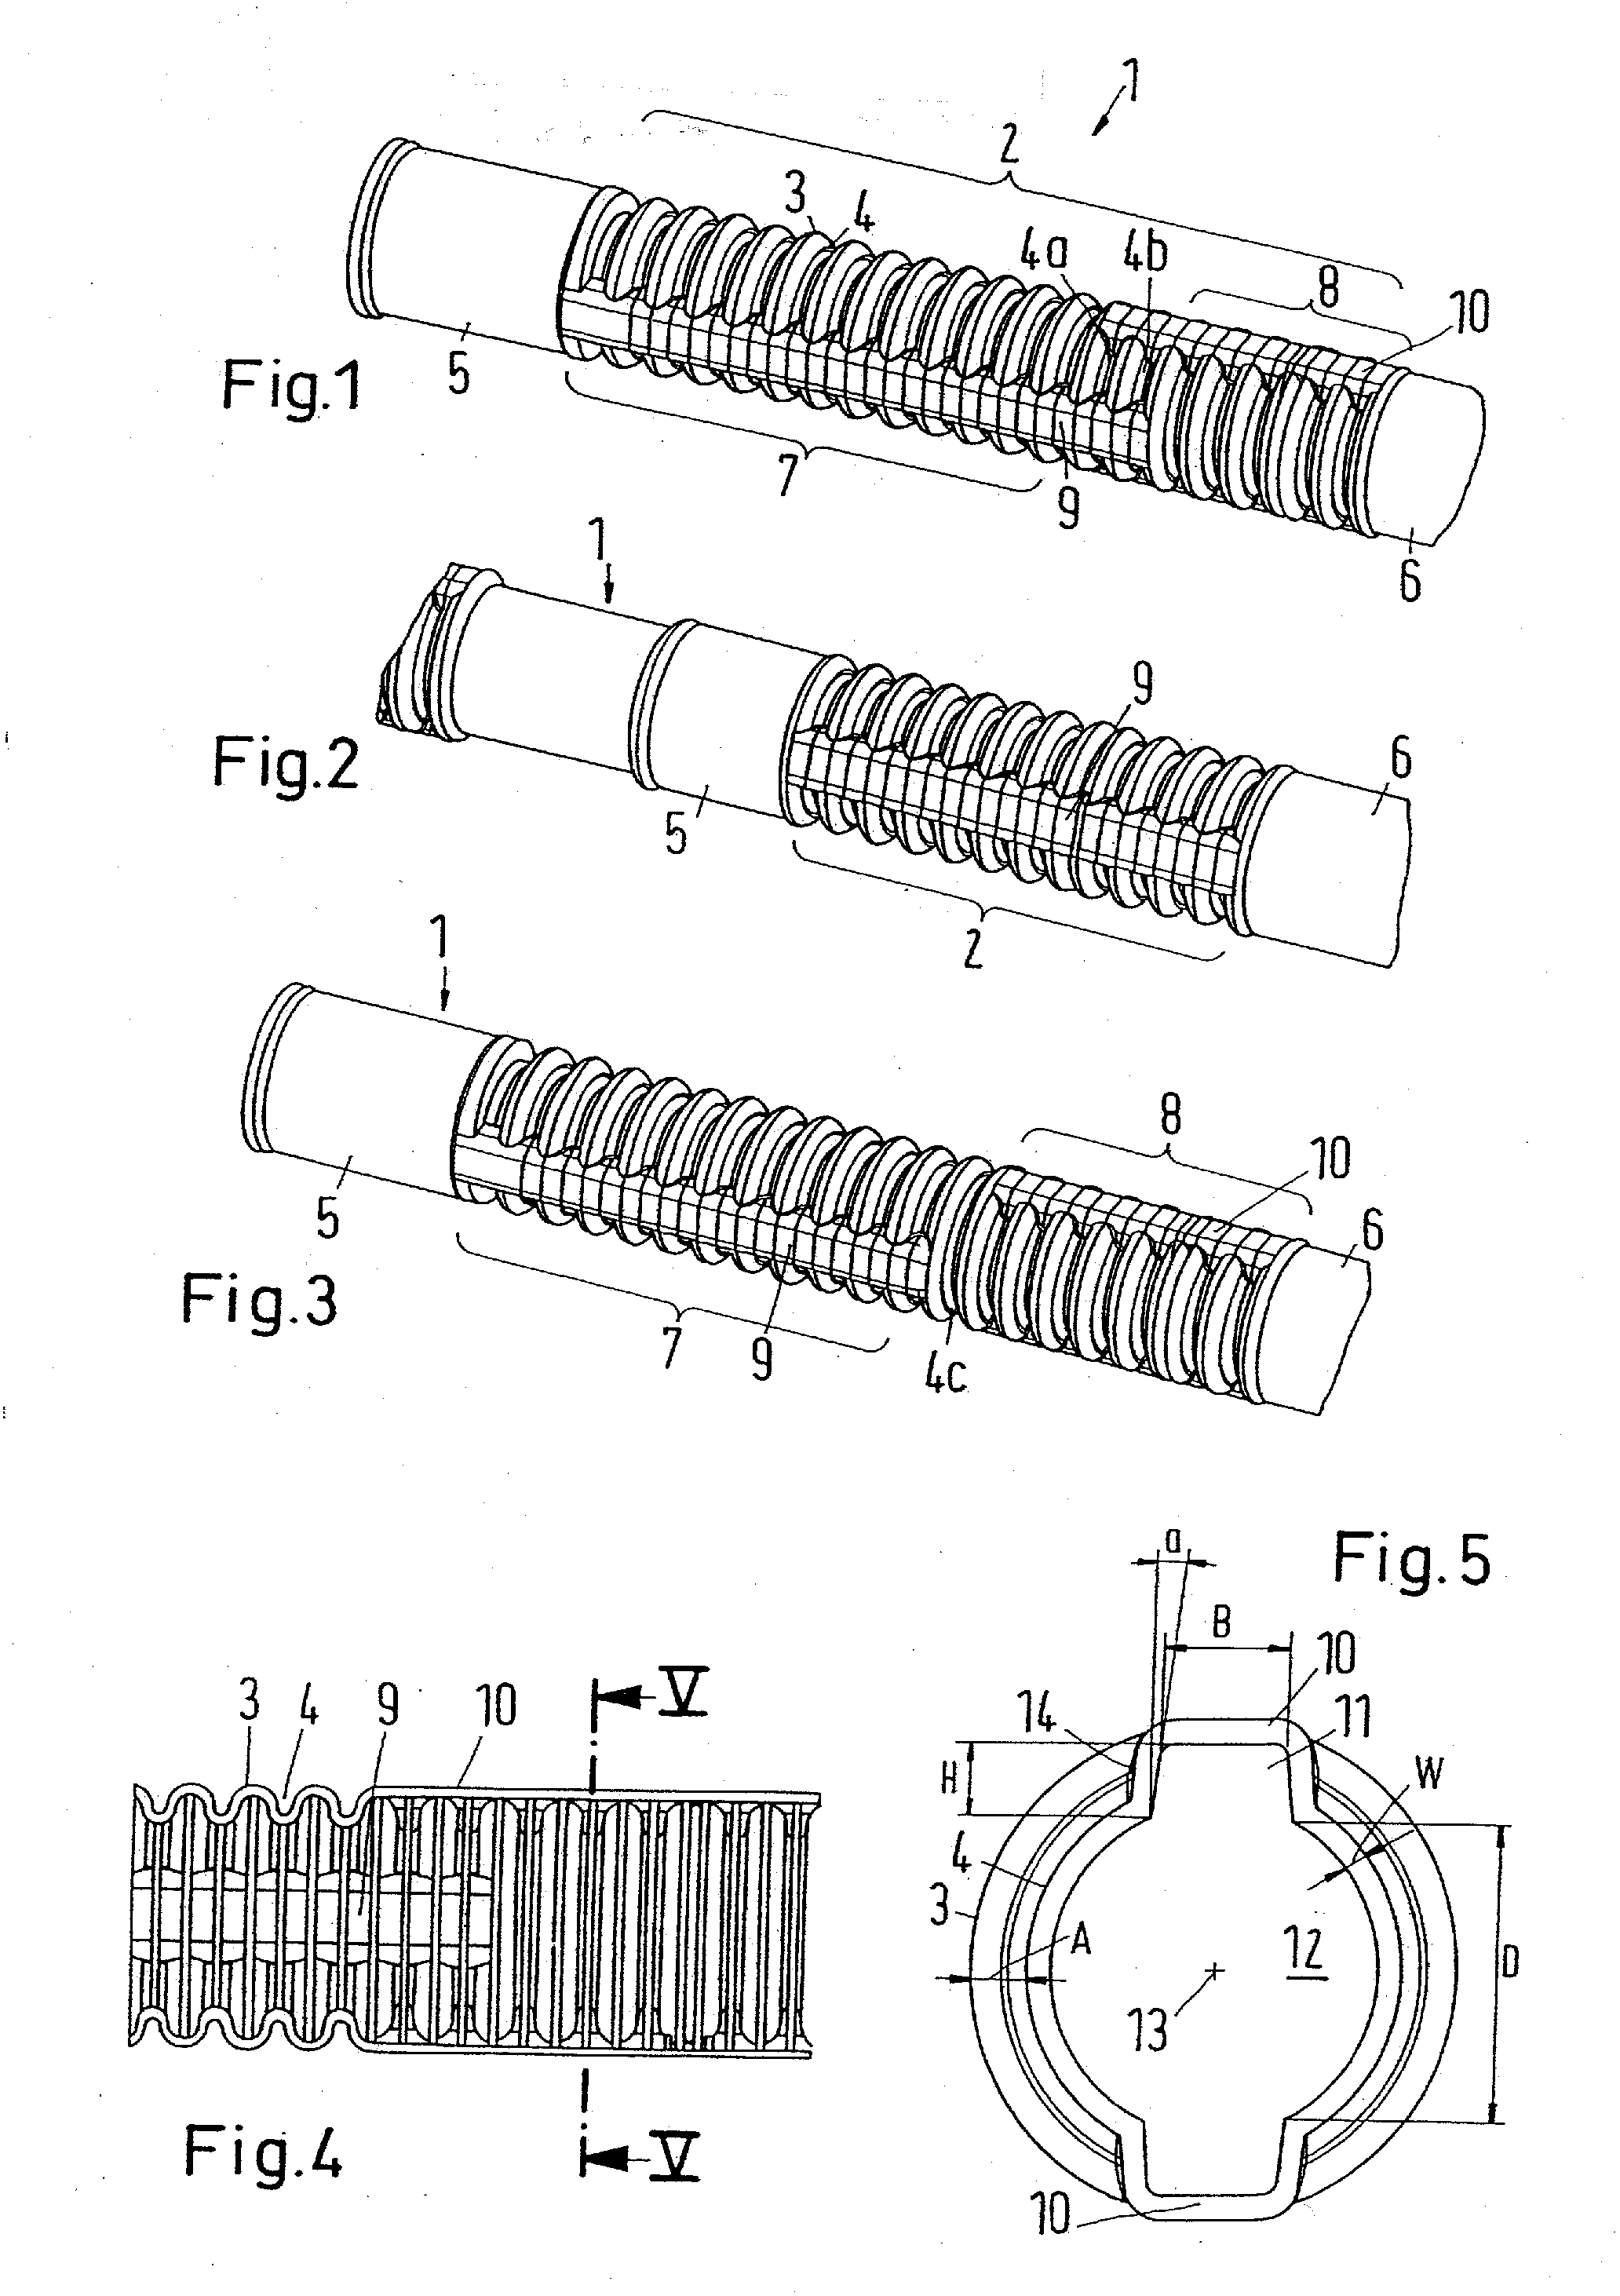 Fluid line and method of making the same